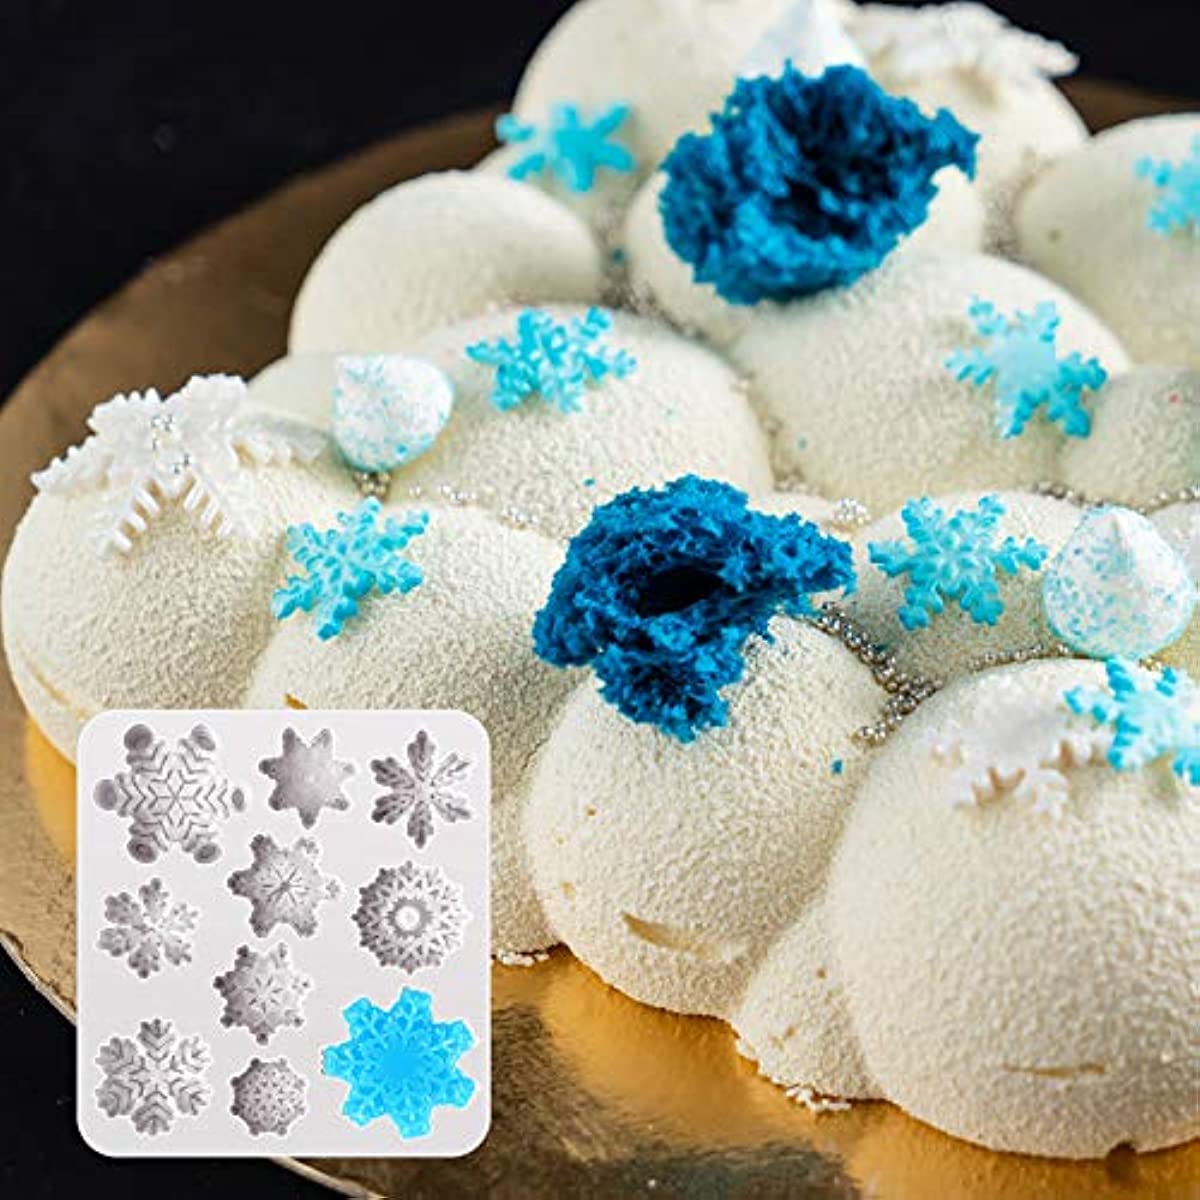 7 Pieces Snowflake Mold Set, Includes 6 Pieces Snowflake Plunger Cutters  and 3D Snowflake Silicone Molds, Snowflake Christmas Fondant Molds for  Party